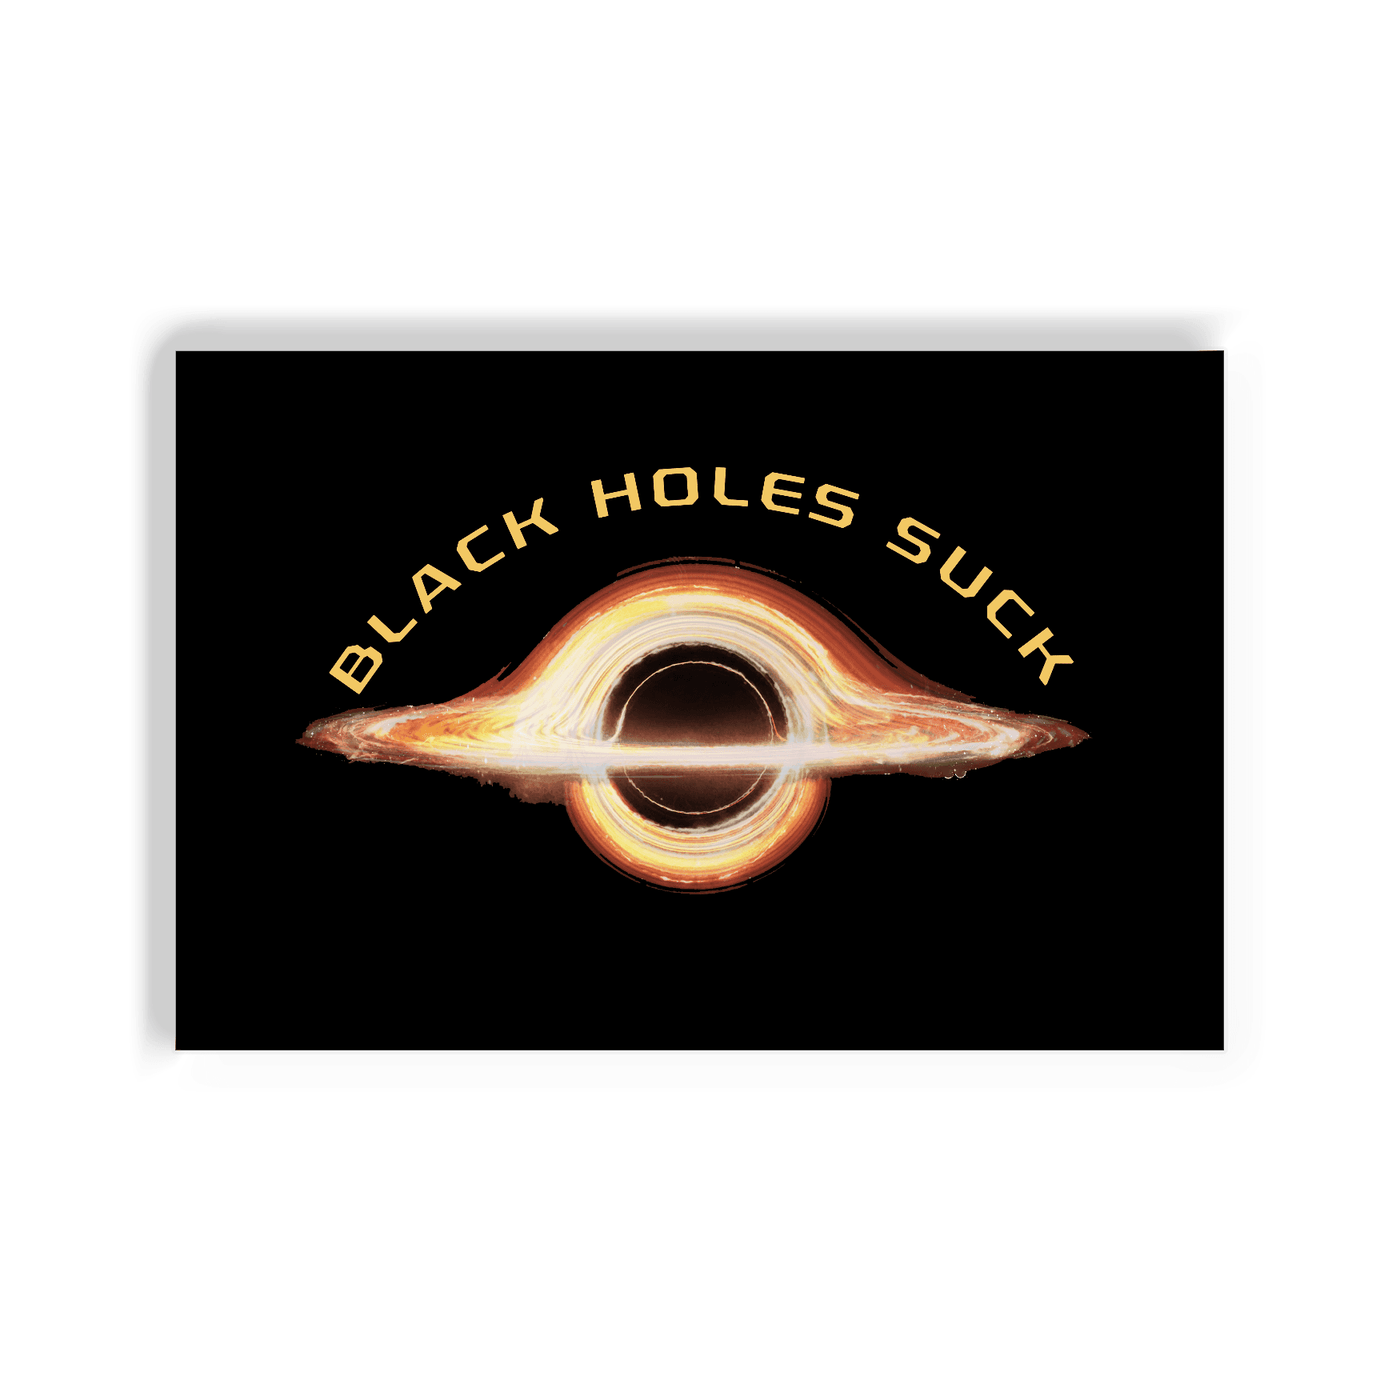 2x3 colorful magnet with image of a black hole and text that says black holes suck